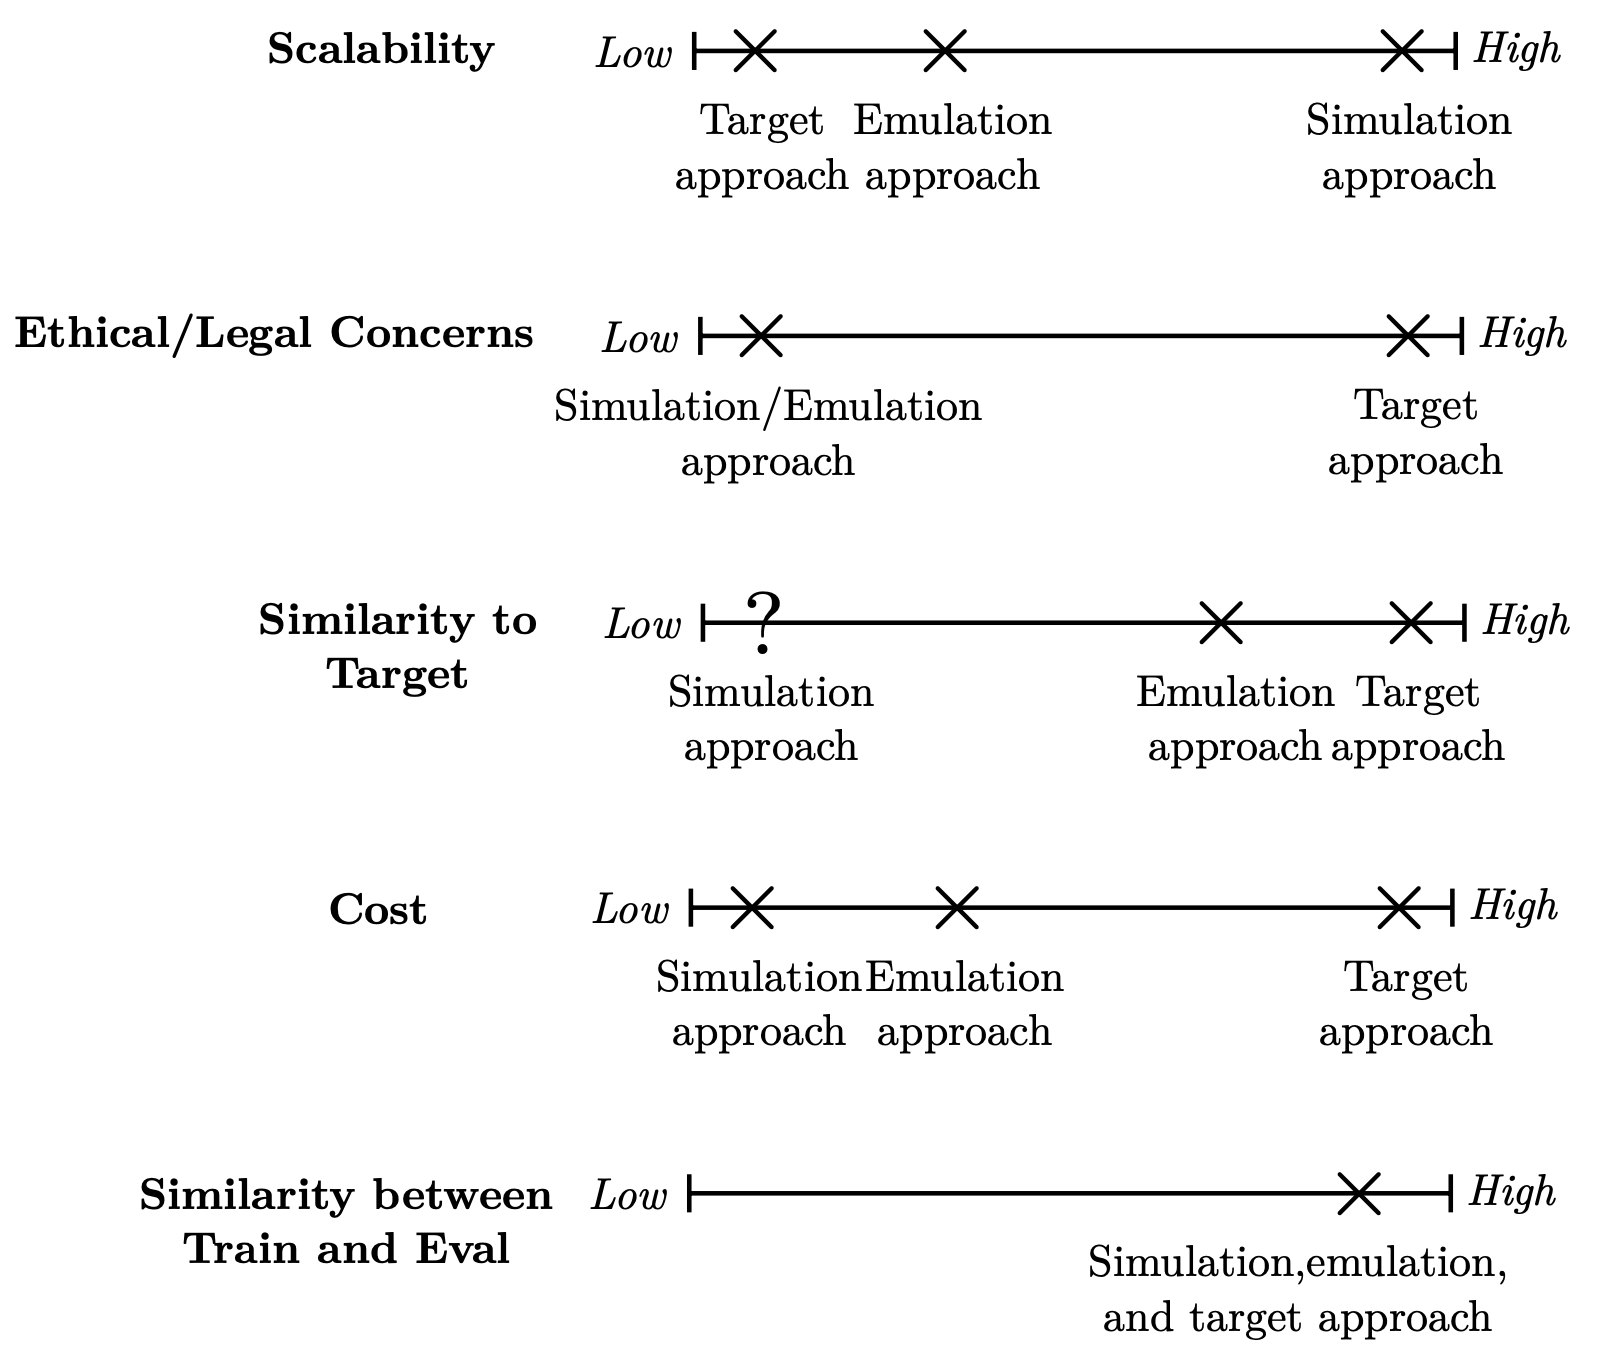 Trade-offs among the simulation approach, the emulation approach, and the target approach; a higher value is preferred on each scale except the "Cost" scale.